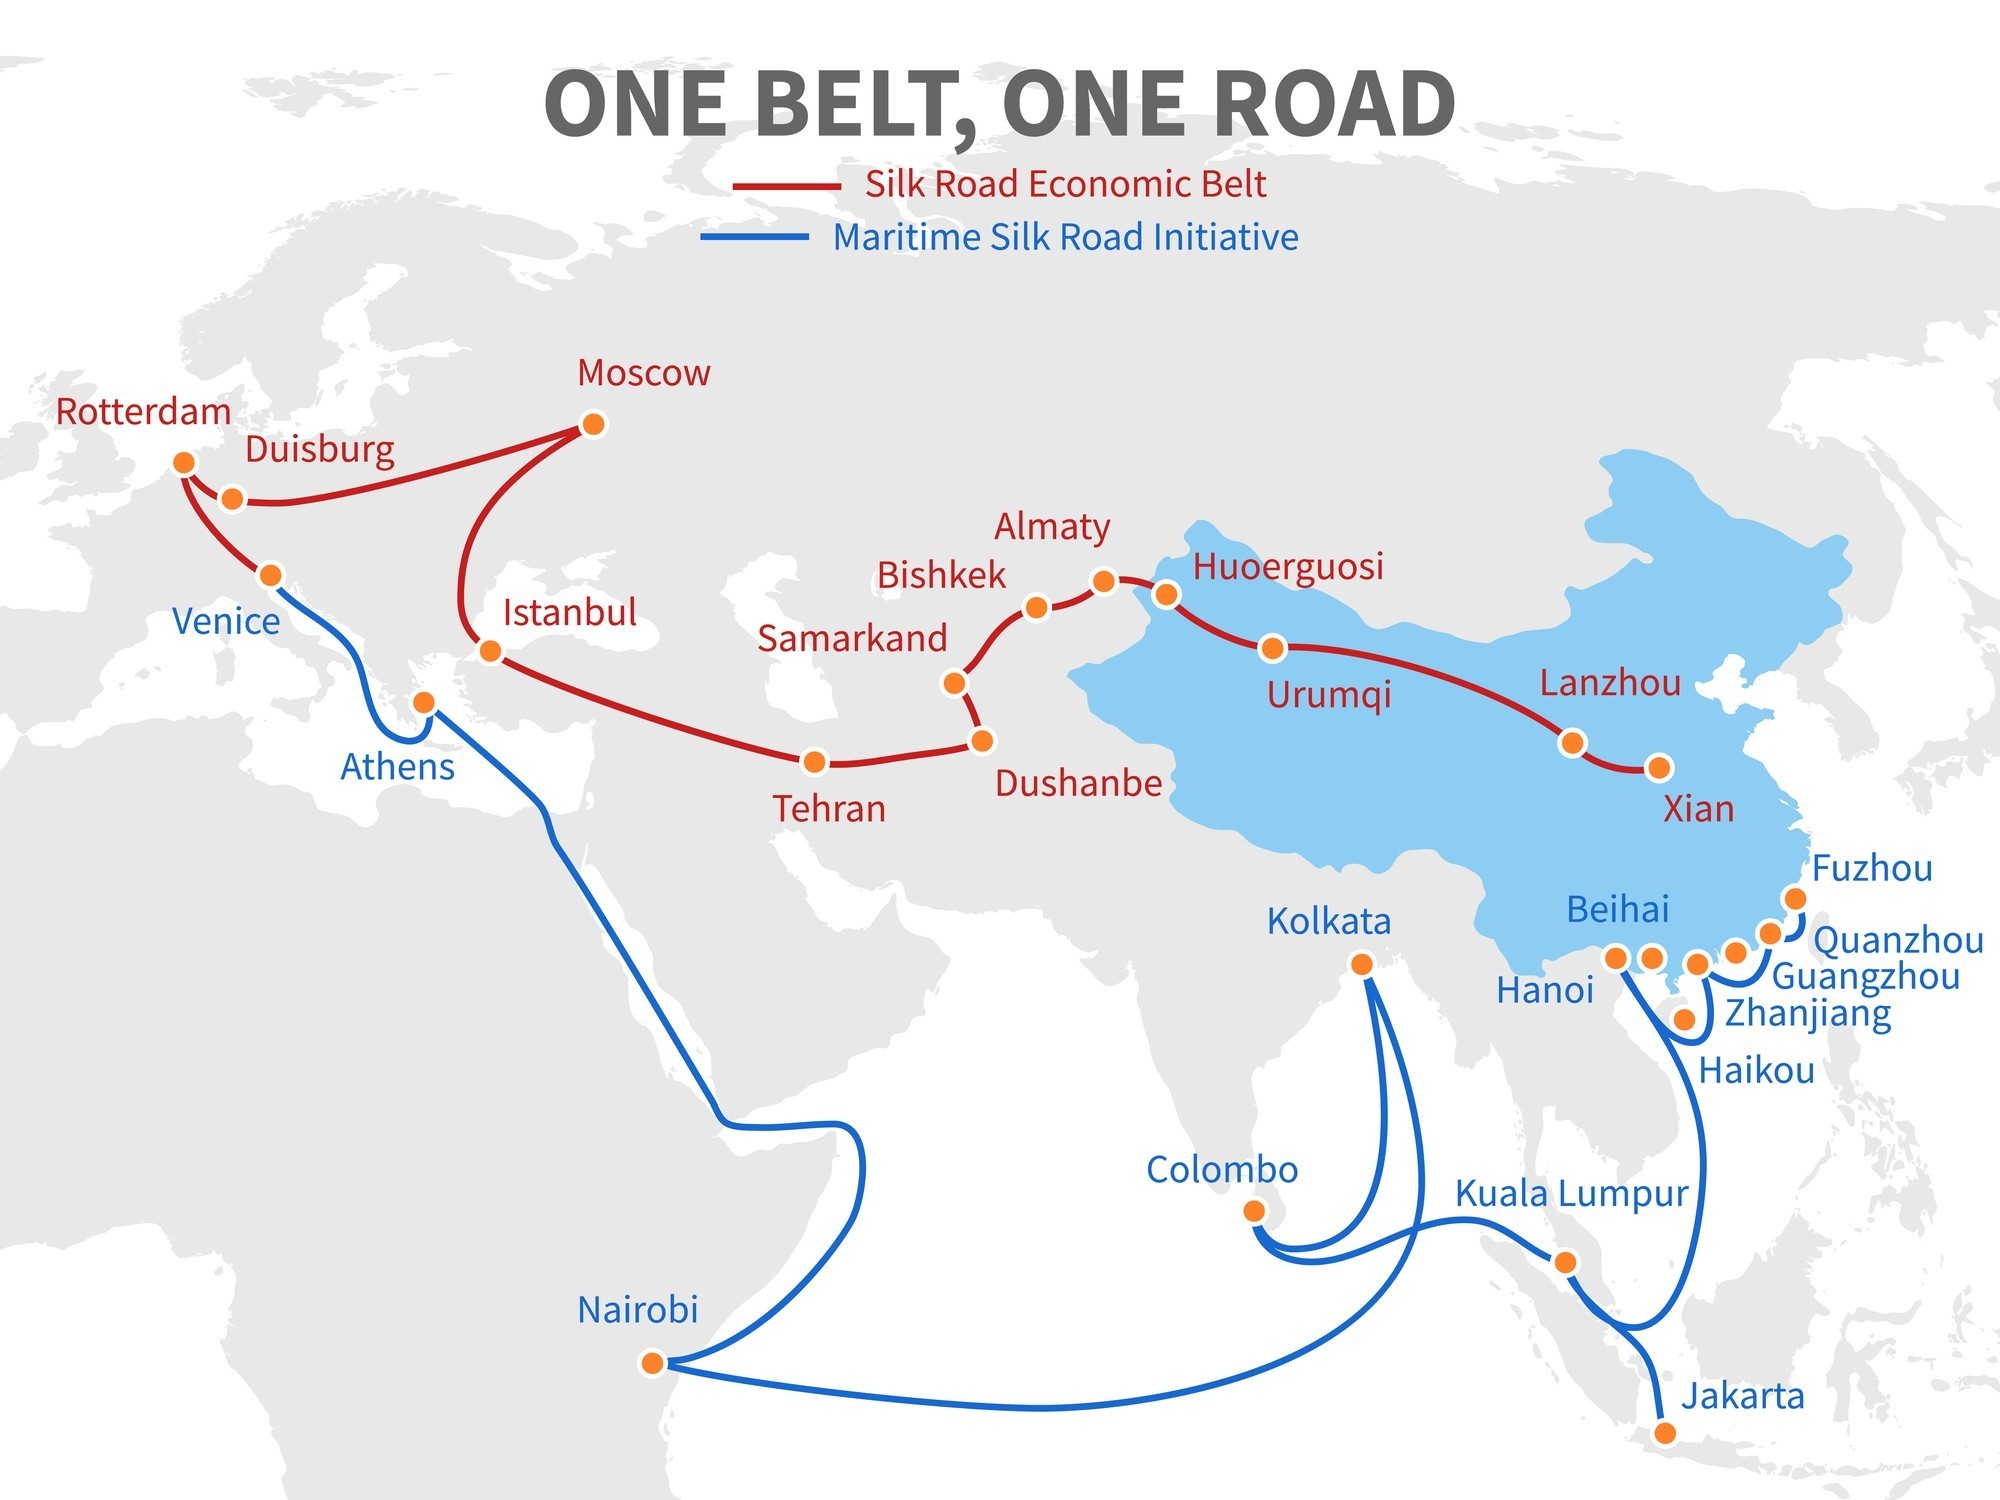 One belt - one road chinese modern silk road. Economic transport way on world map vector illustration. Transit roadmap, shipping european and eurasia distant